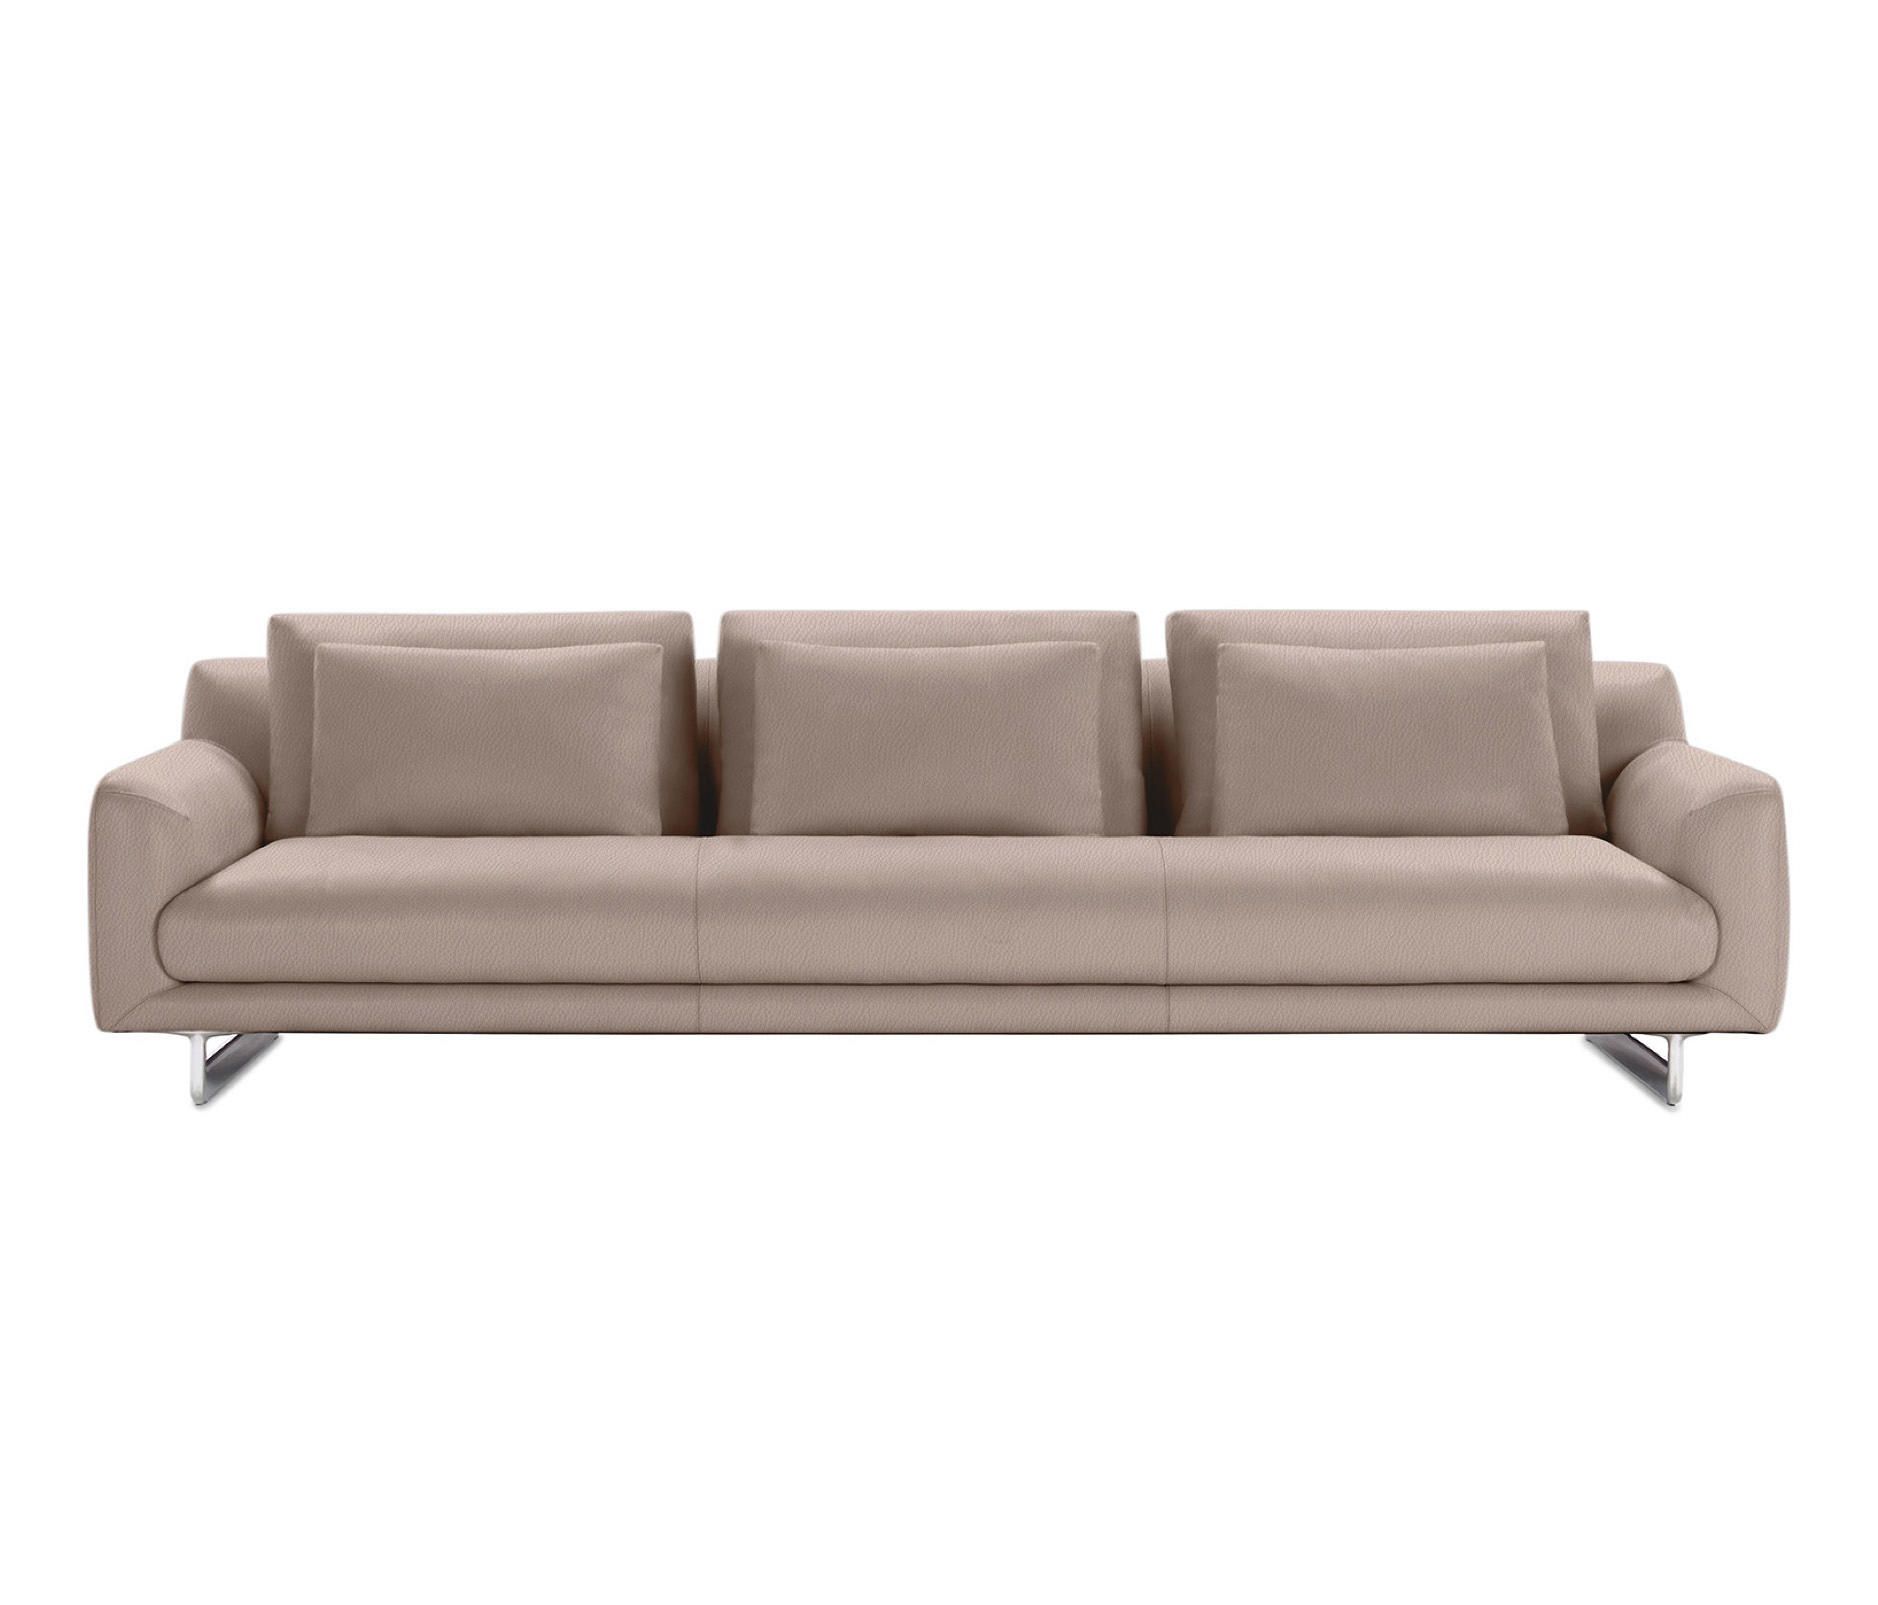 Lecco 110" Sofa & Designer Furniture | Architonic With 110" Oversized Sofas (Gallery 2 of 20)